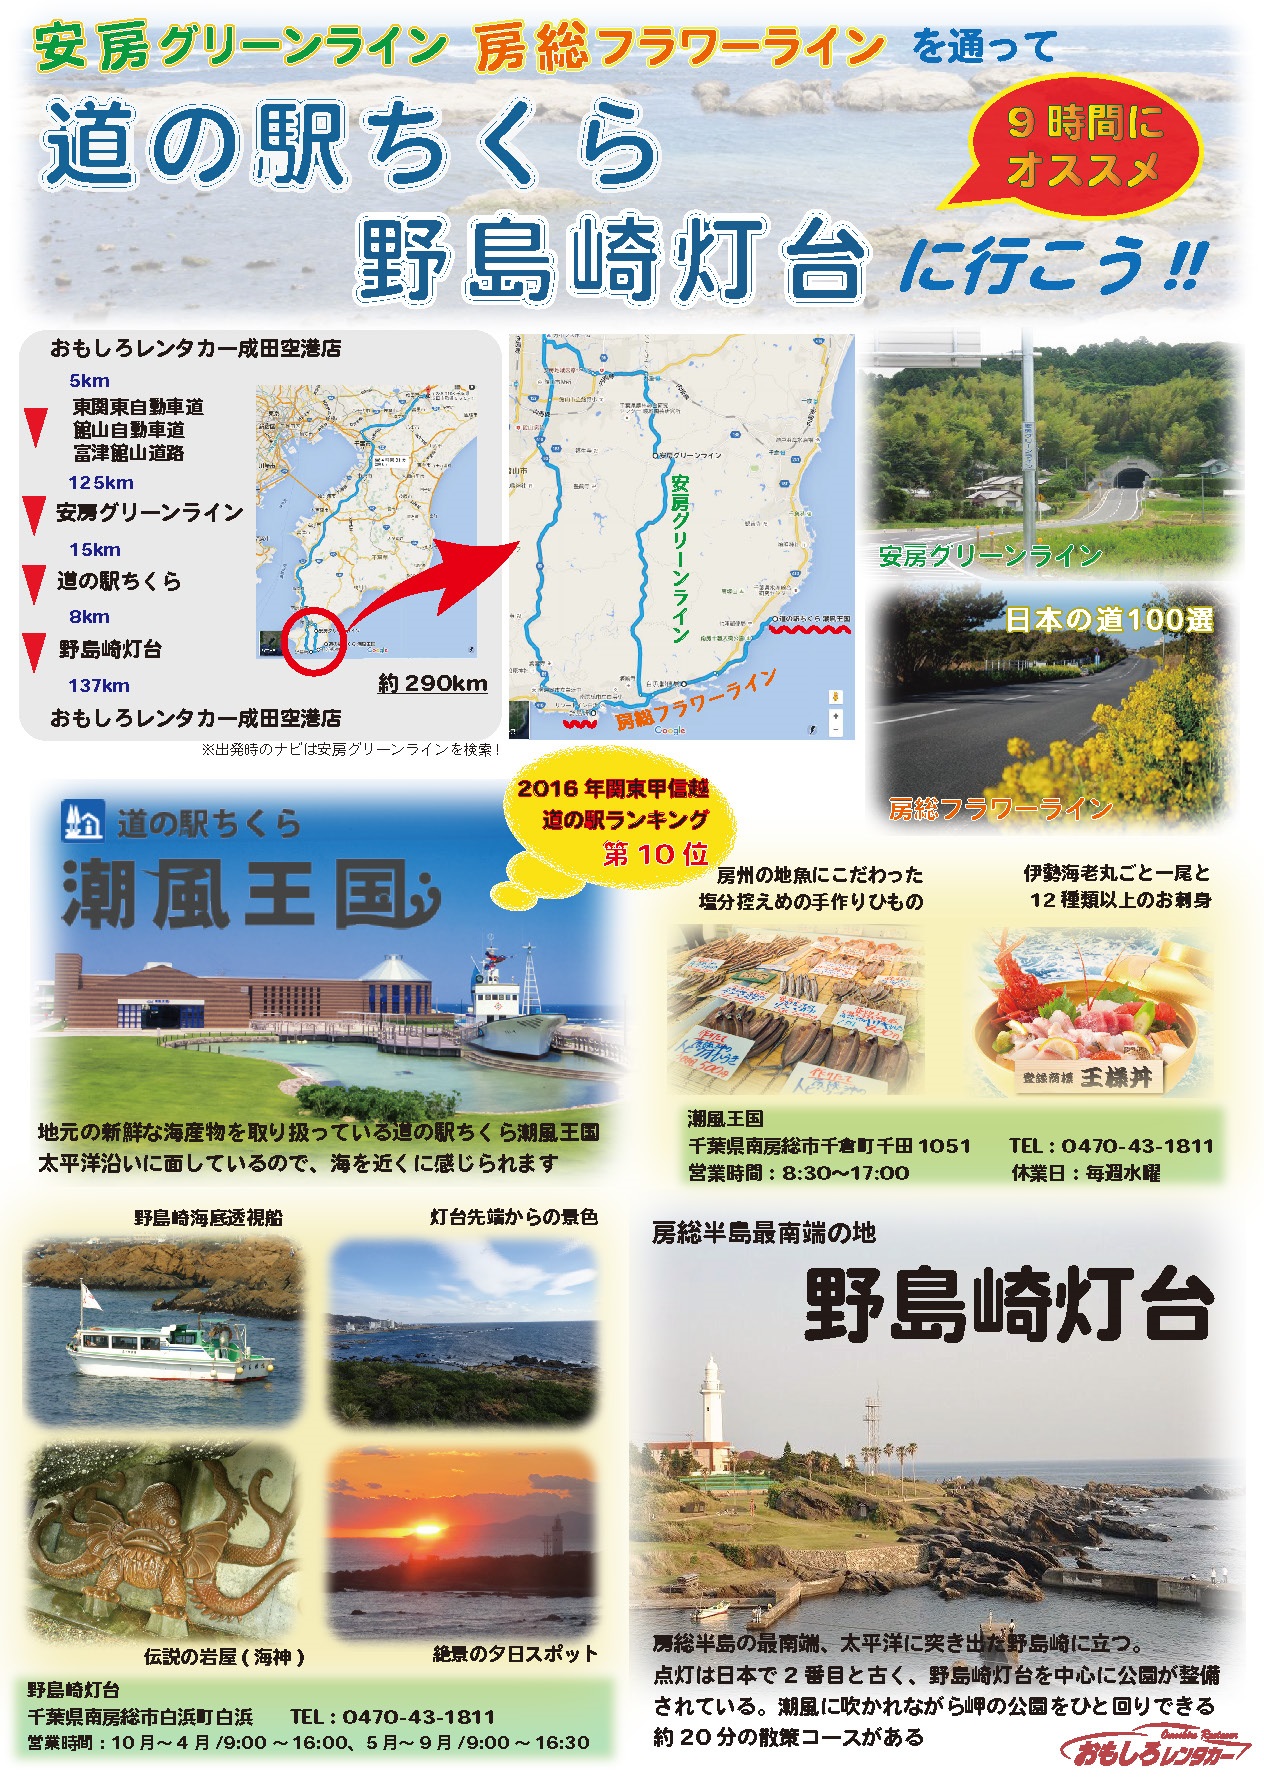 Let's go to Roadside Station Chikura Nojimasaki Lighthouse through the Abo Green Line Boso Flower Line! !! 9 hour drive course